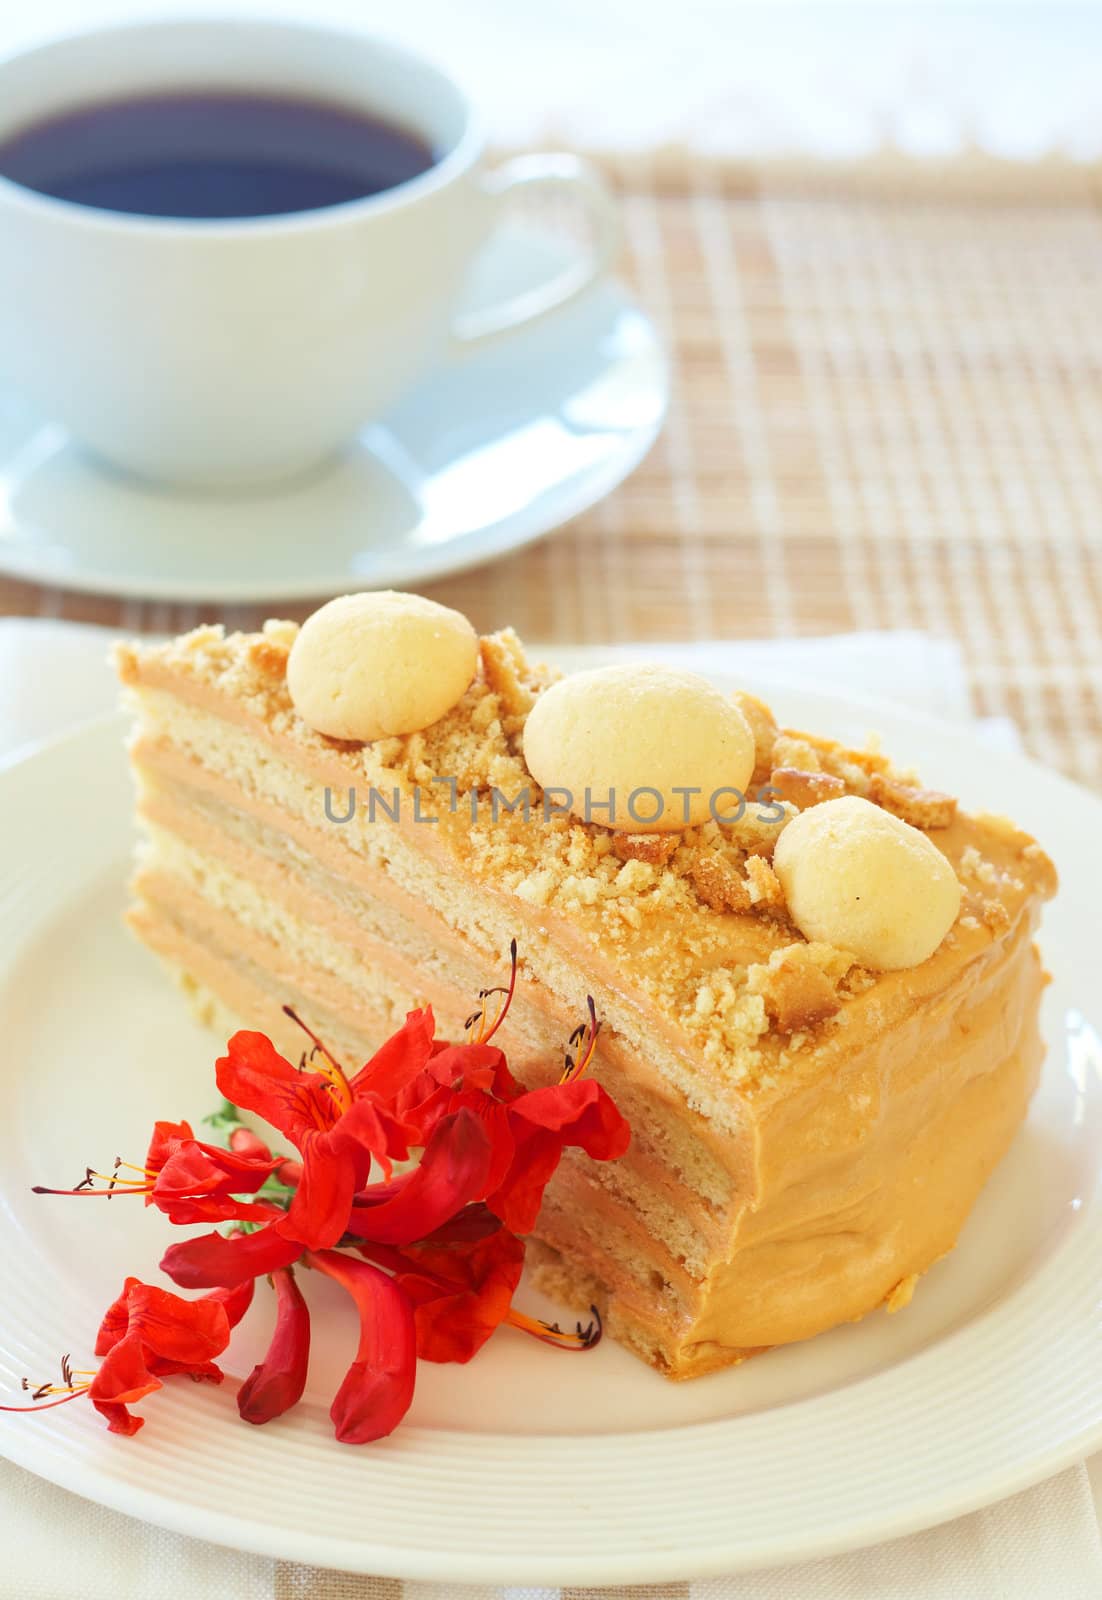 Slice of caramel Medovik cake made of honey and caramel cream, decorated with flowers with a cup of coffee